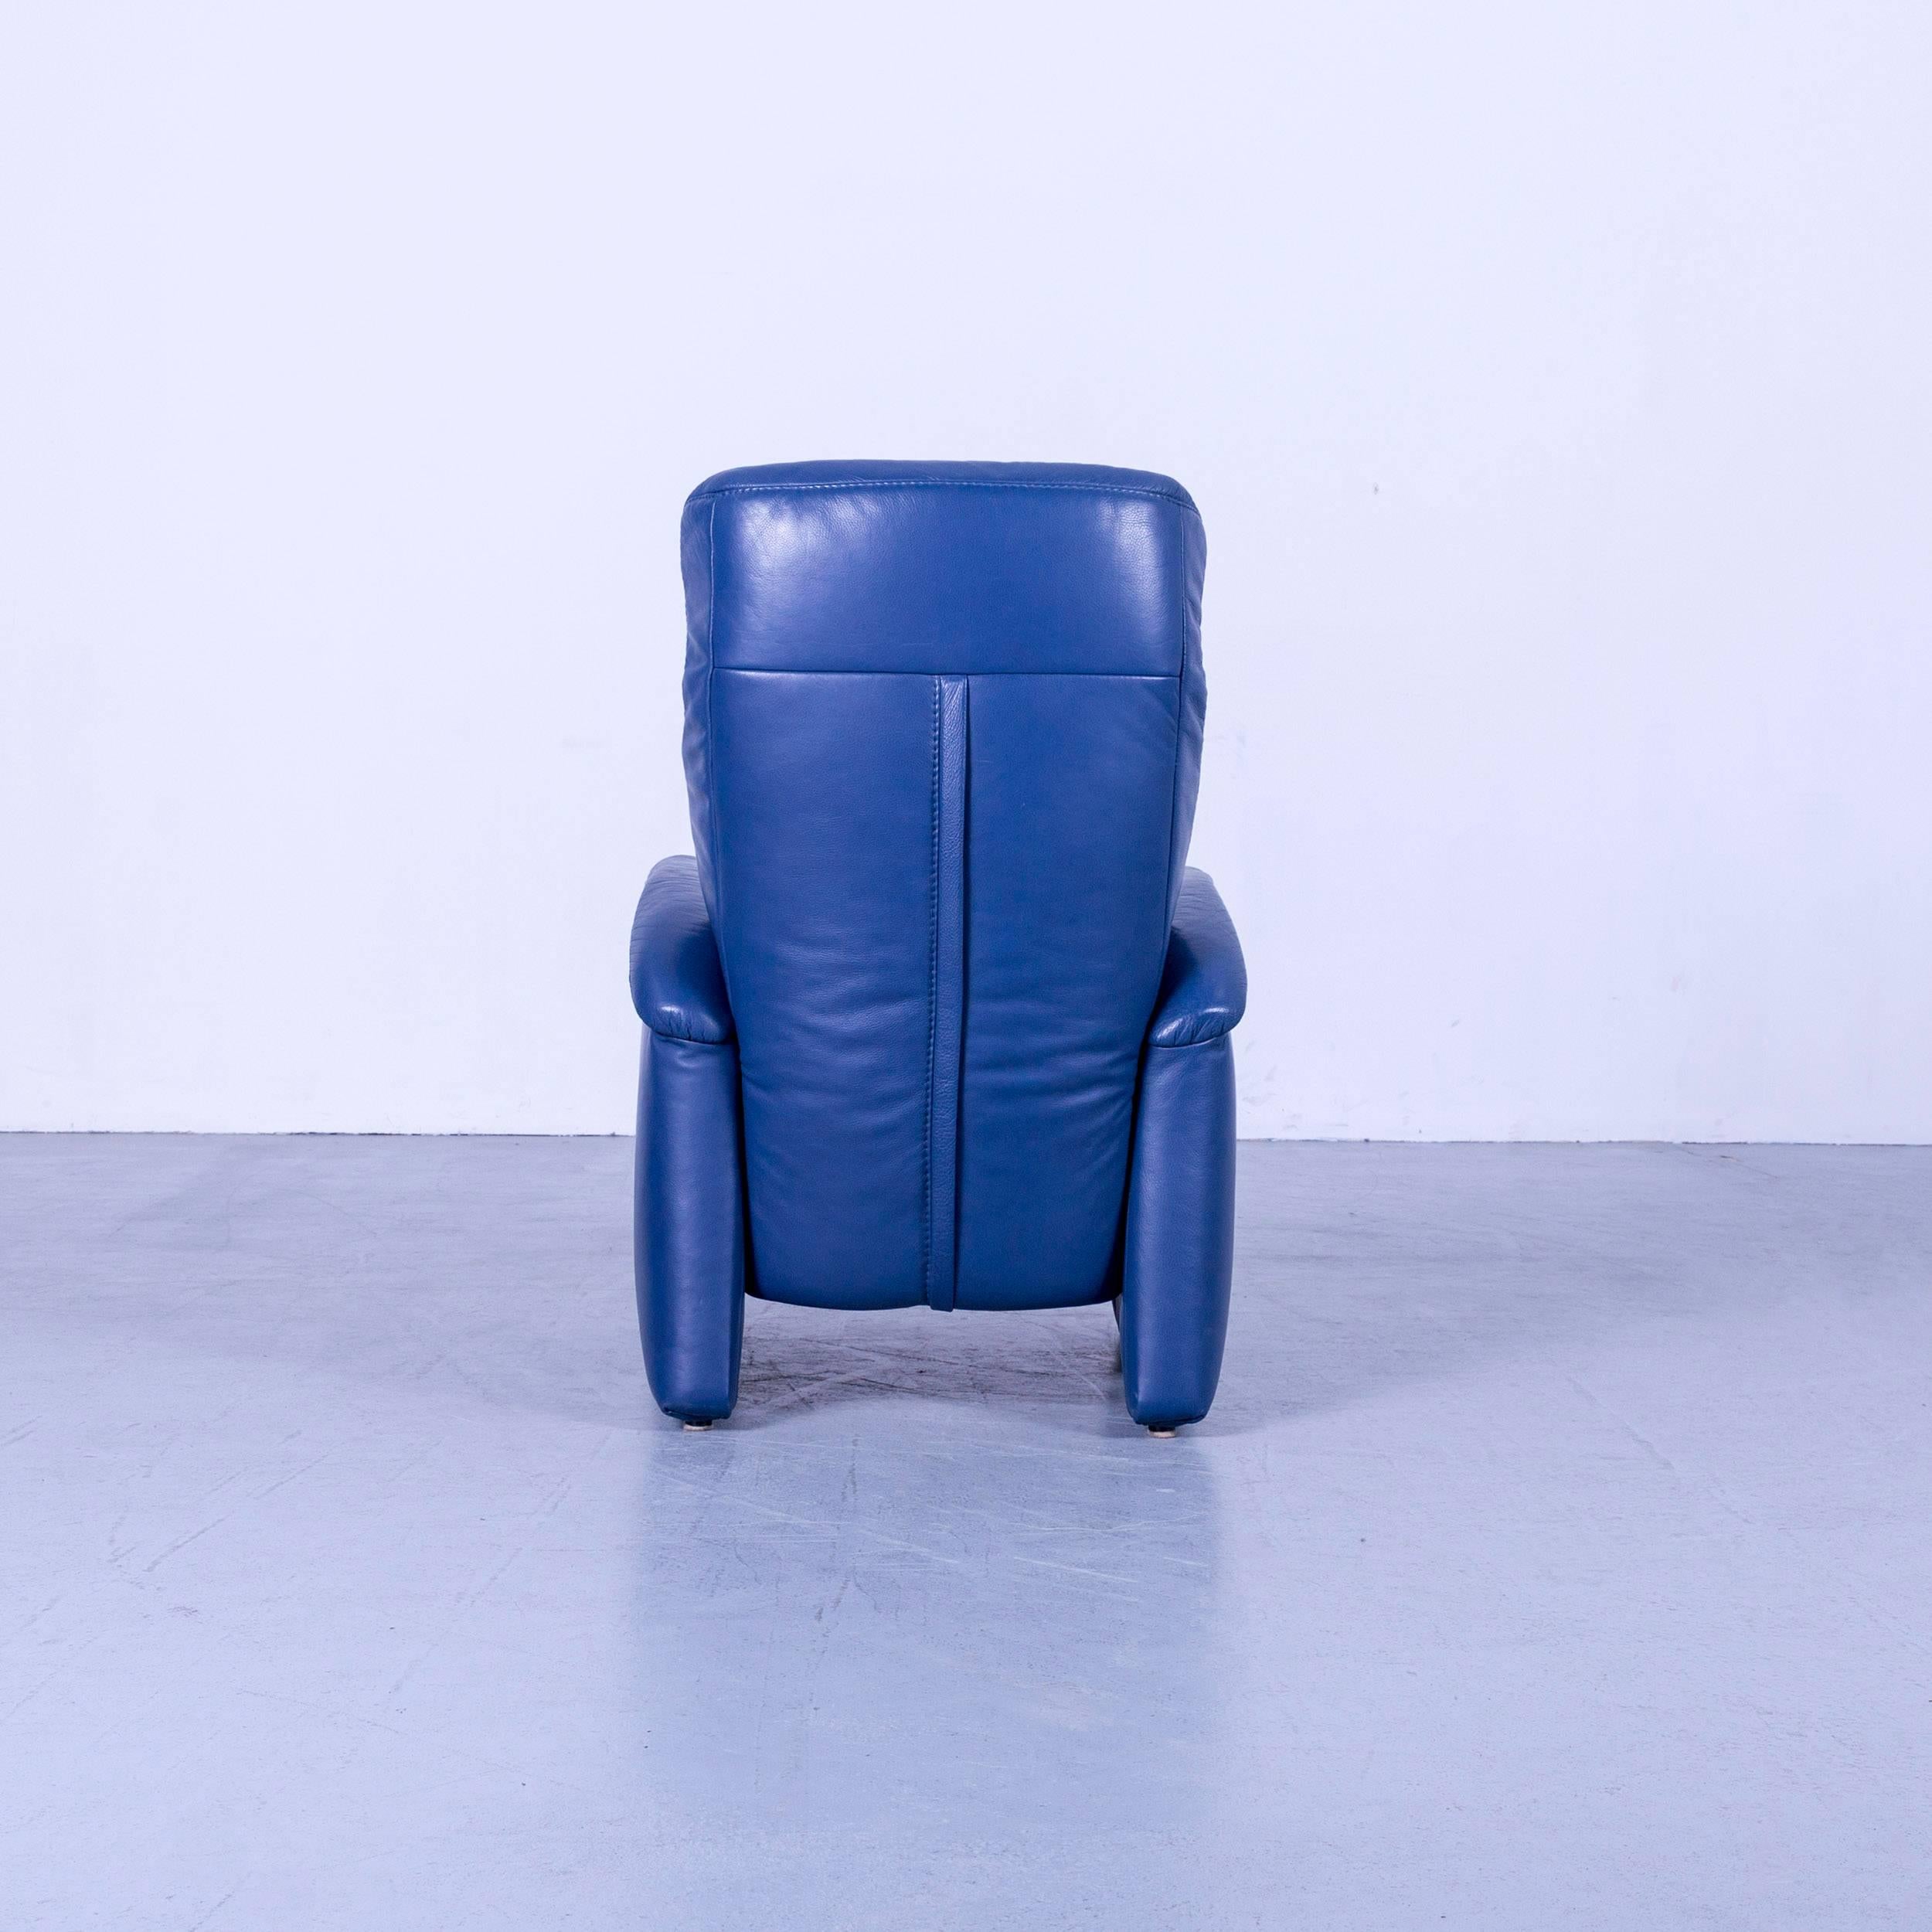 Himolla Leather Armchair Blue One-Seat Recliner 5